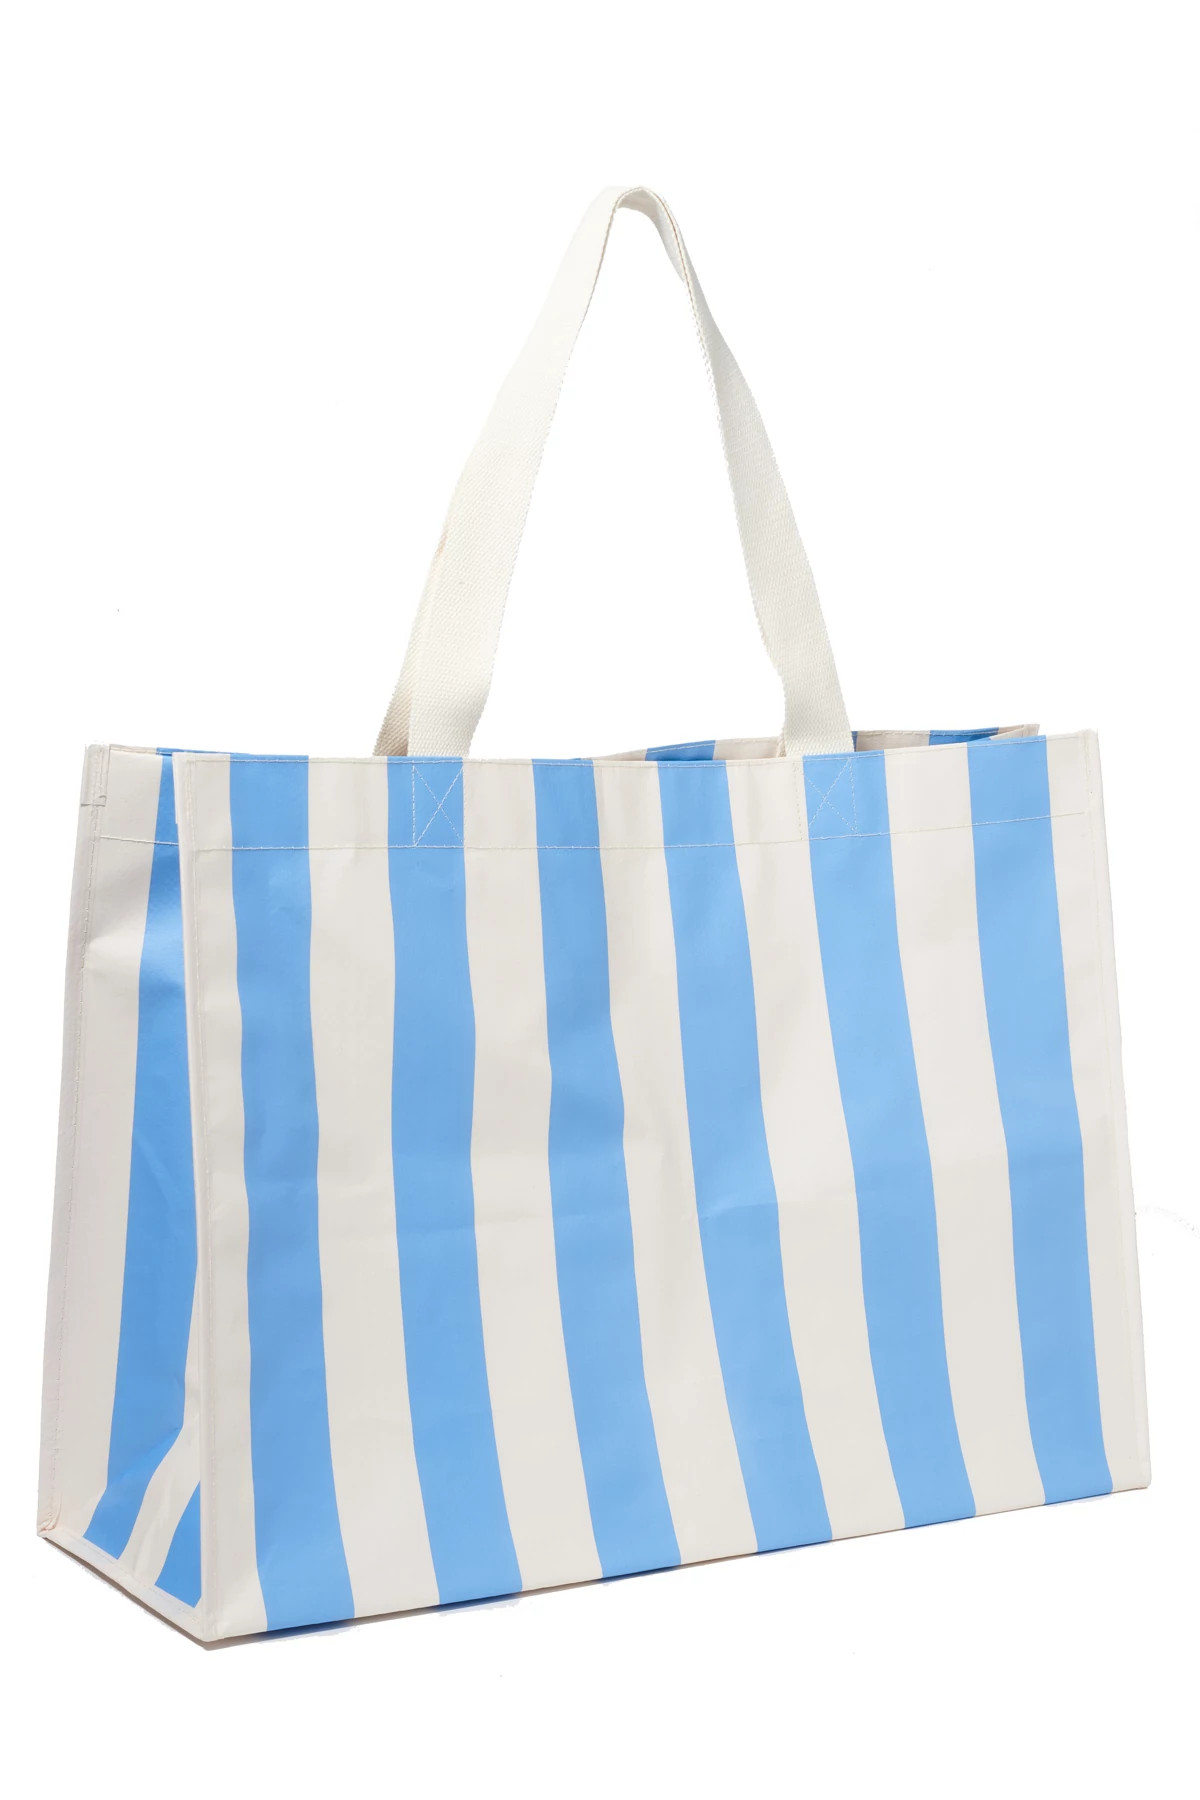 BLUE Carryall Beach Tote image number 2